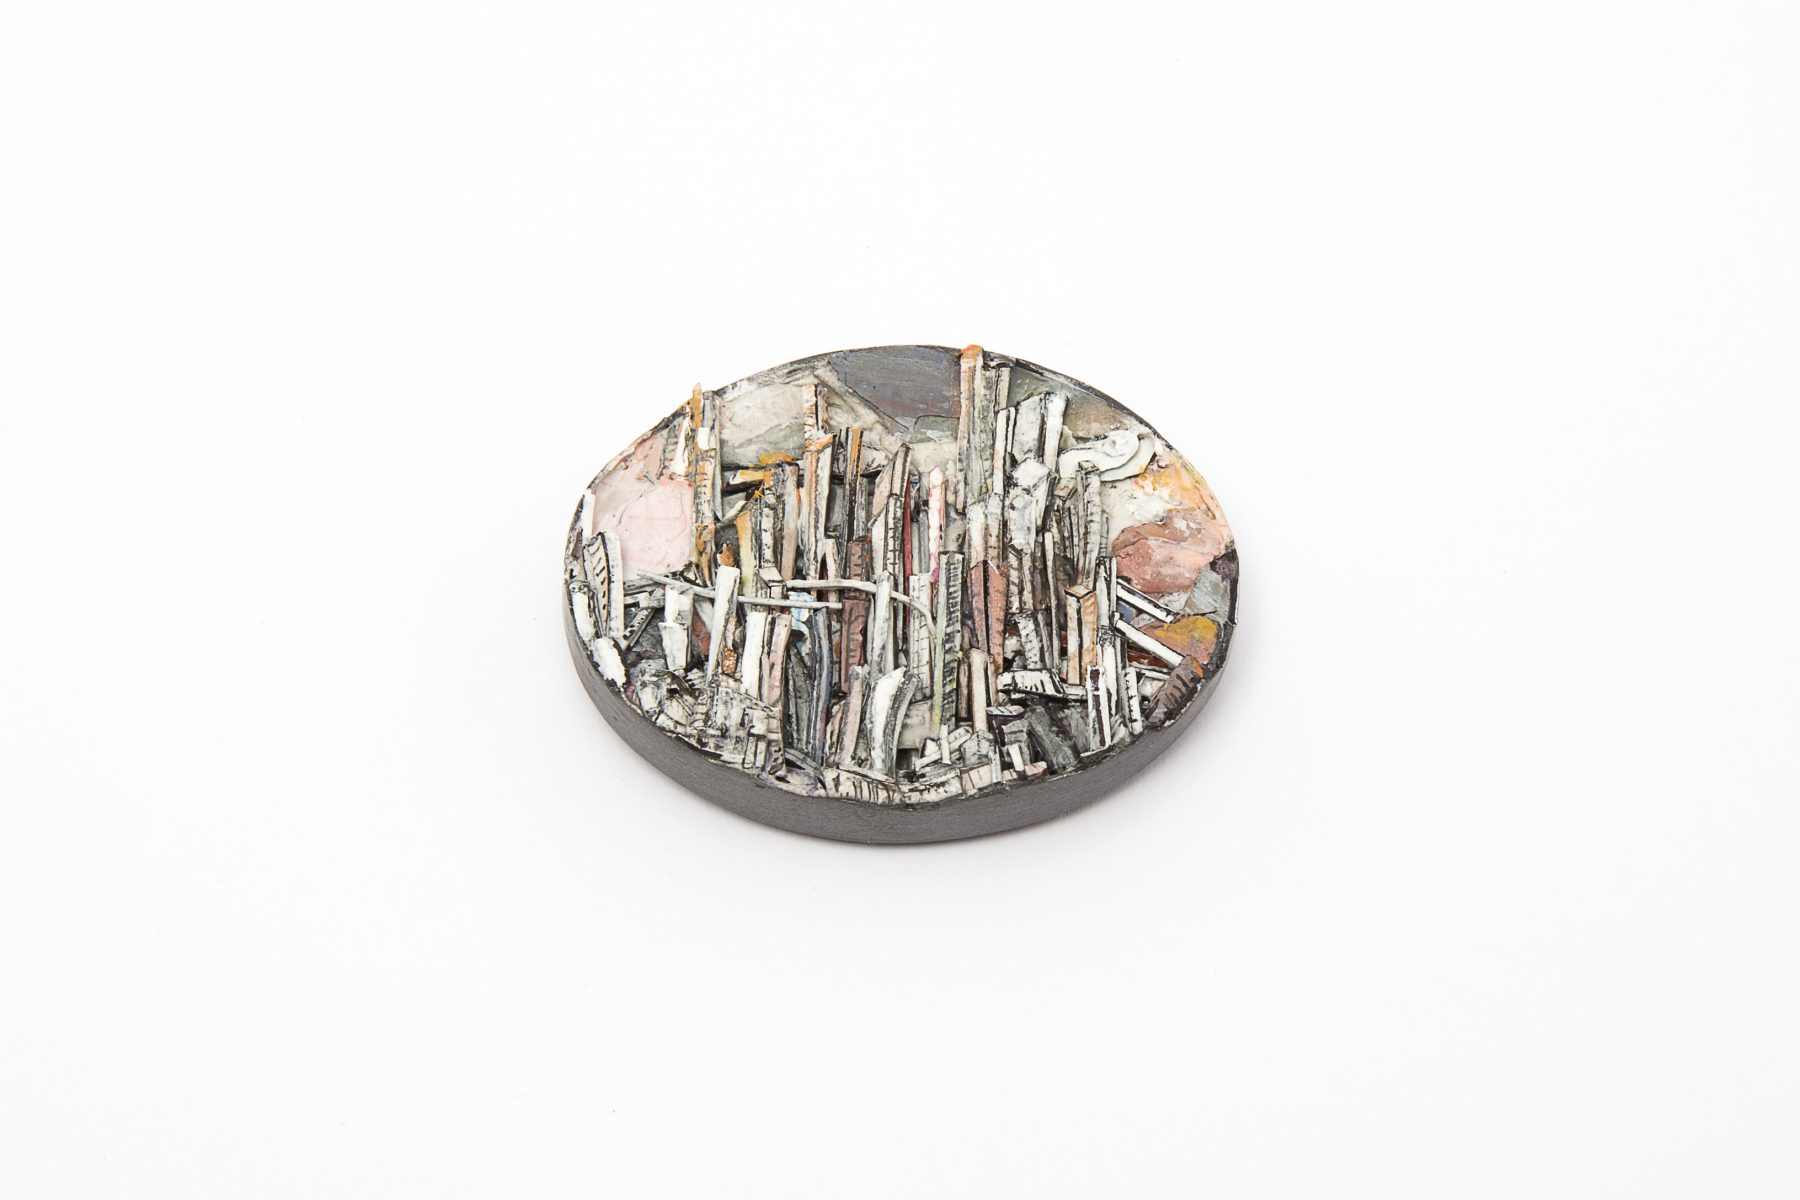 Untitled | Brooch | 2018 | Paper, paint, silver, wood, graphite, stainless steel | 54X42X25mm